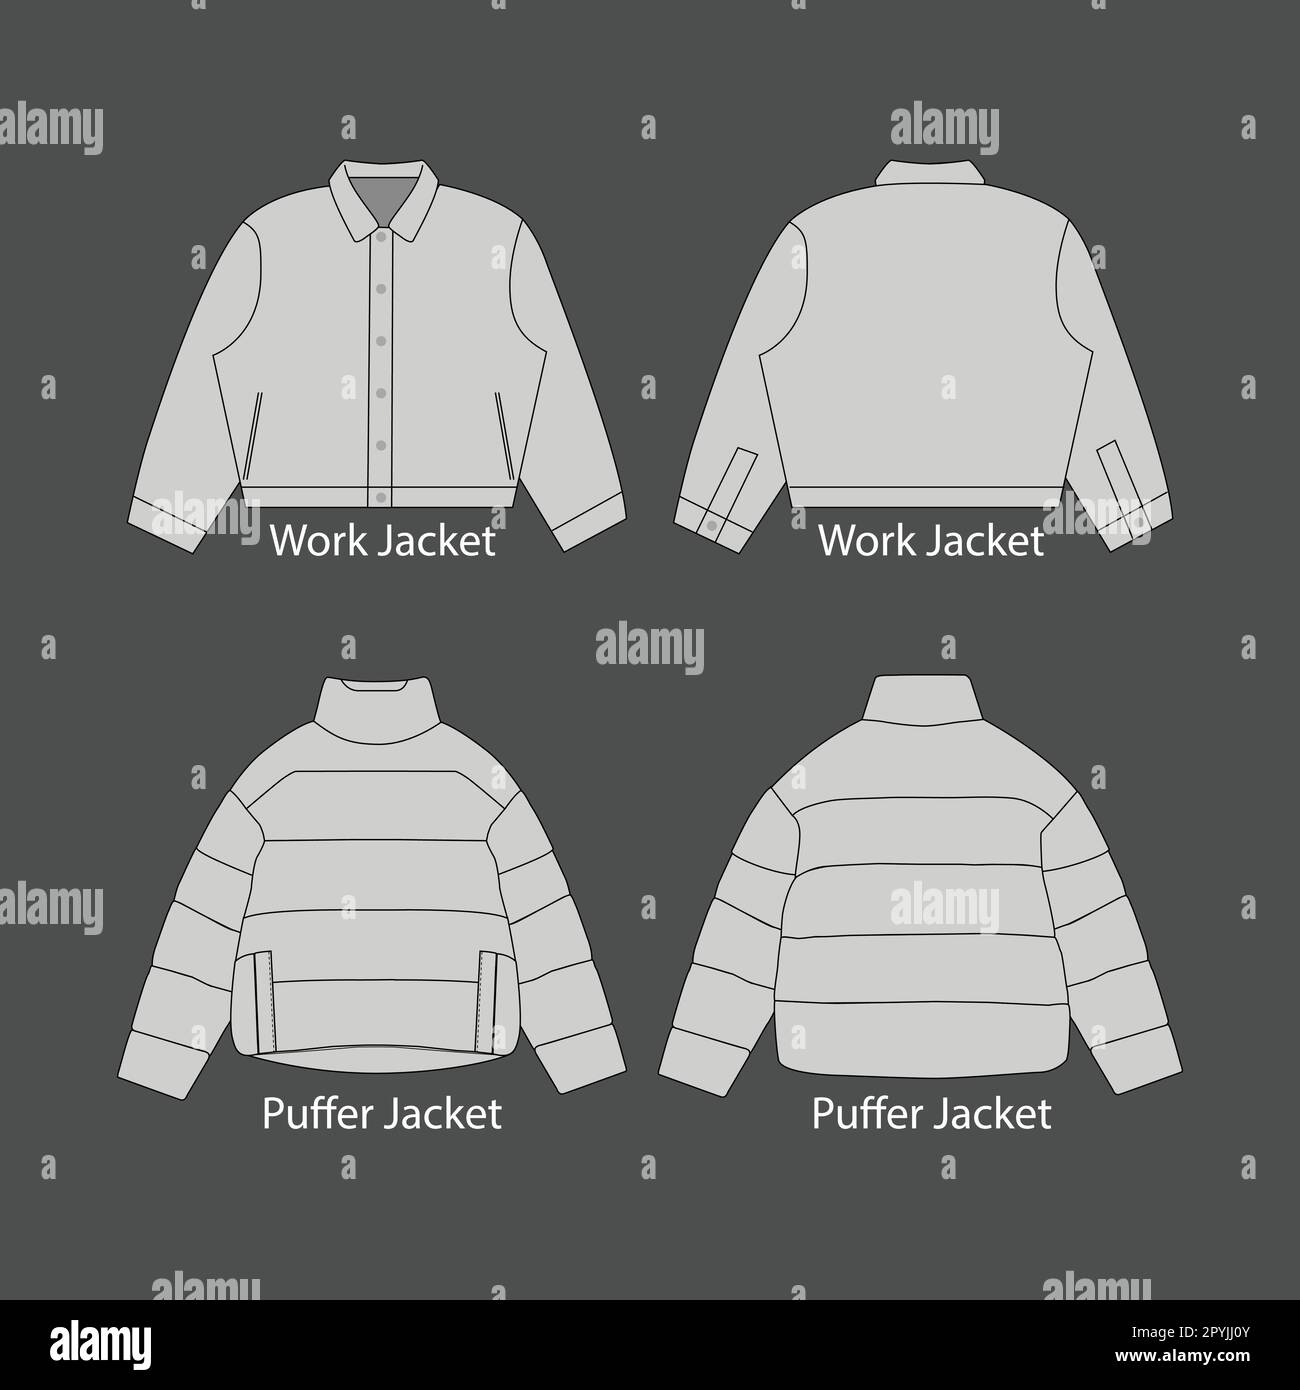 Puffer jacket, technical drawing mockup. Jacket technical drawing ...